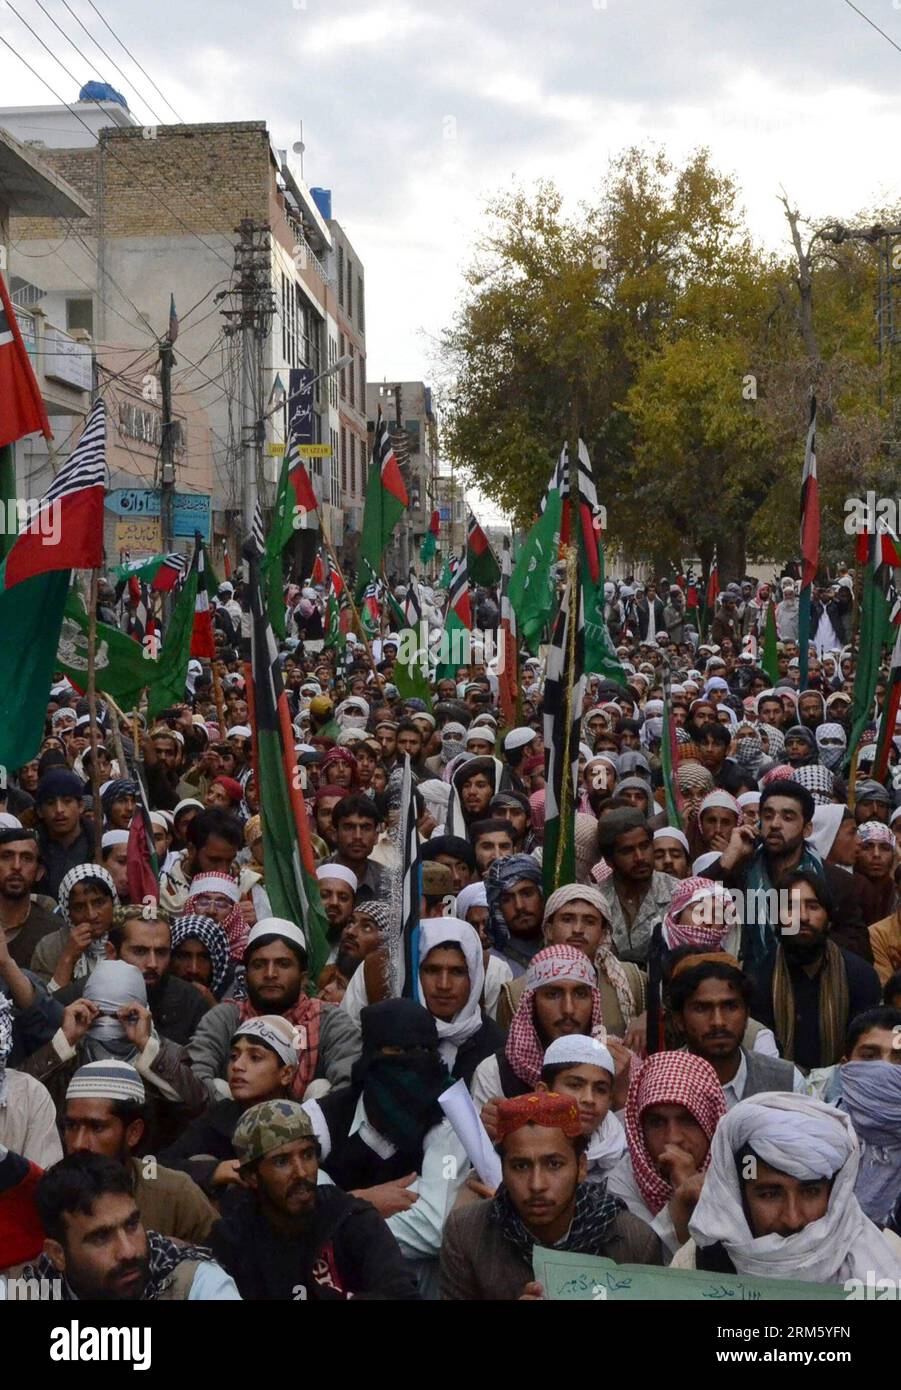 Bildnummer: 60745060  Datum: 22.11.2013  Copyright: imago/Xinhua     Supporters of religious group Ahl-i-Sunnat Wal Jamaat (ASWJ) gathered during a protest in southwest Pakistan s Quetta on Nov. 22, 2013. Hundreds of thousands Pakistanis protested across the country on Friday against last week s violence in garrison city of Rawalpindi that killed 11 and injured couple of others. (Xinhua/Asad) PAKISTAN-QUETTA-PROTEST DAY PUBLICATIONxNOTxINxCHN Politik Religion Gesellschaft Demo Demonstrant Protest x0x xrj 2013 hoch Stock Photo